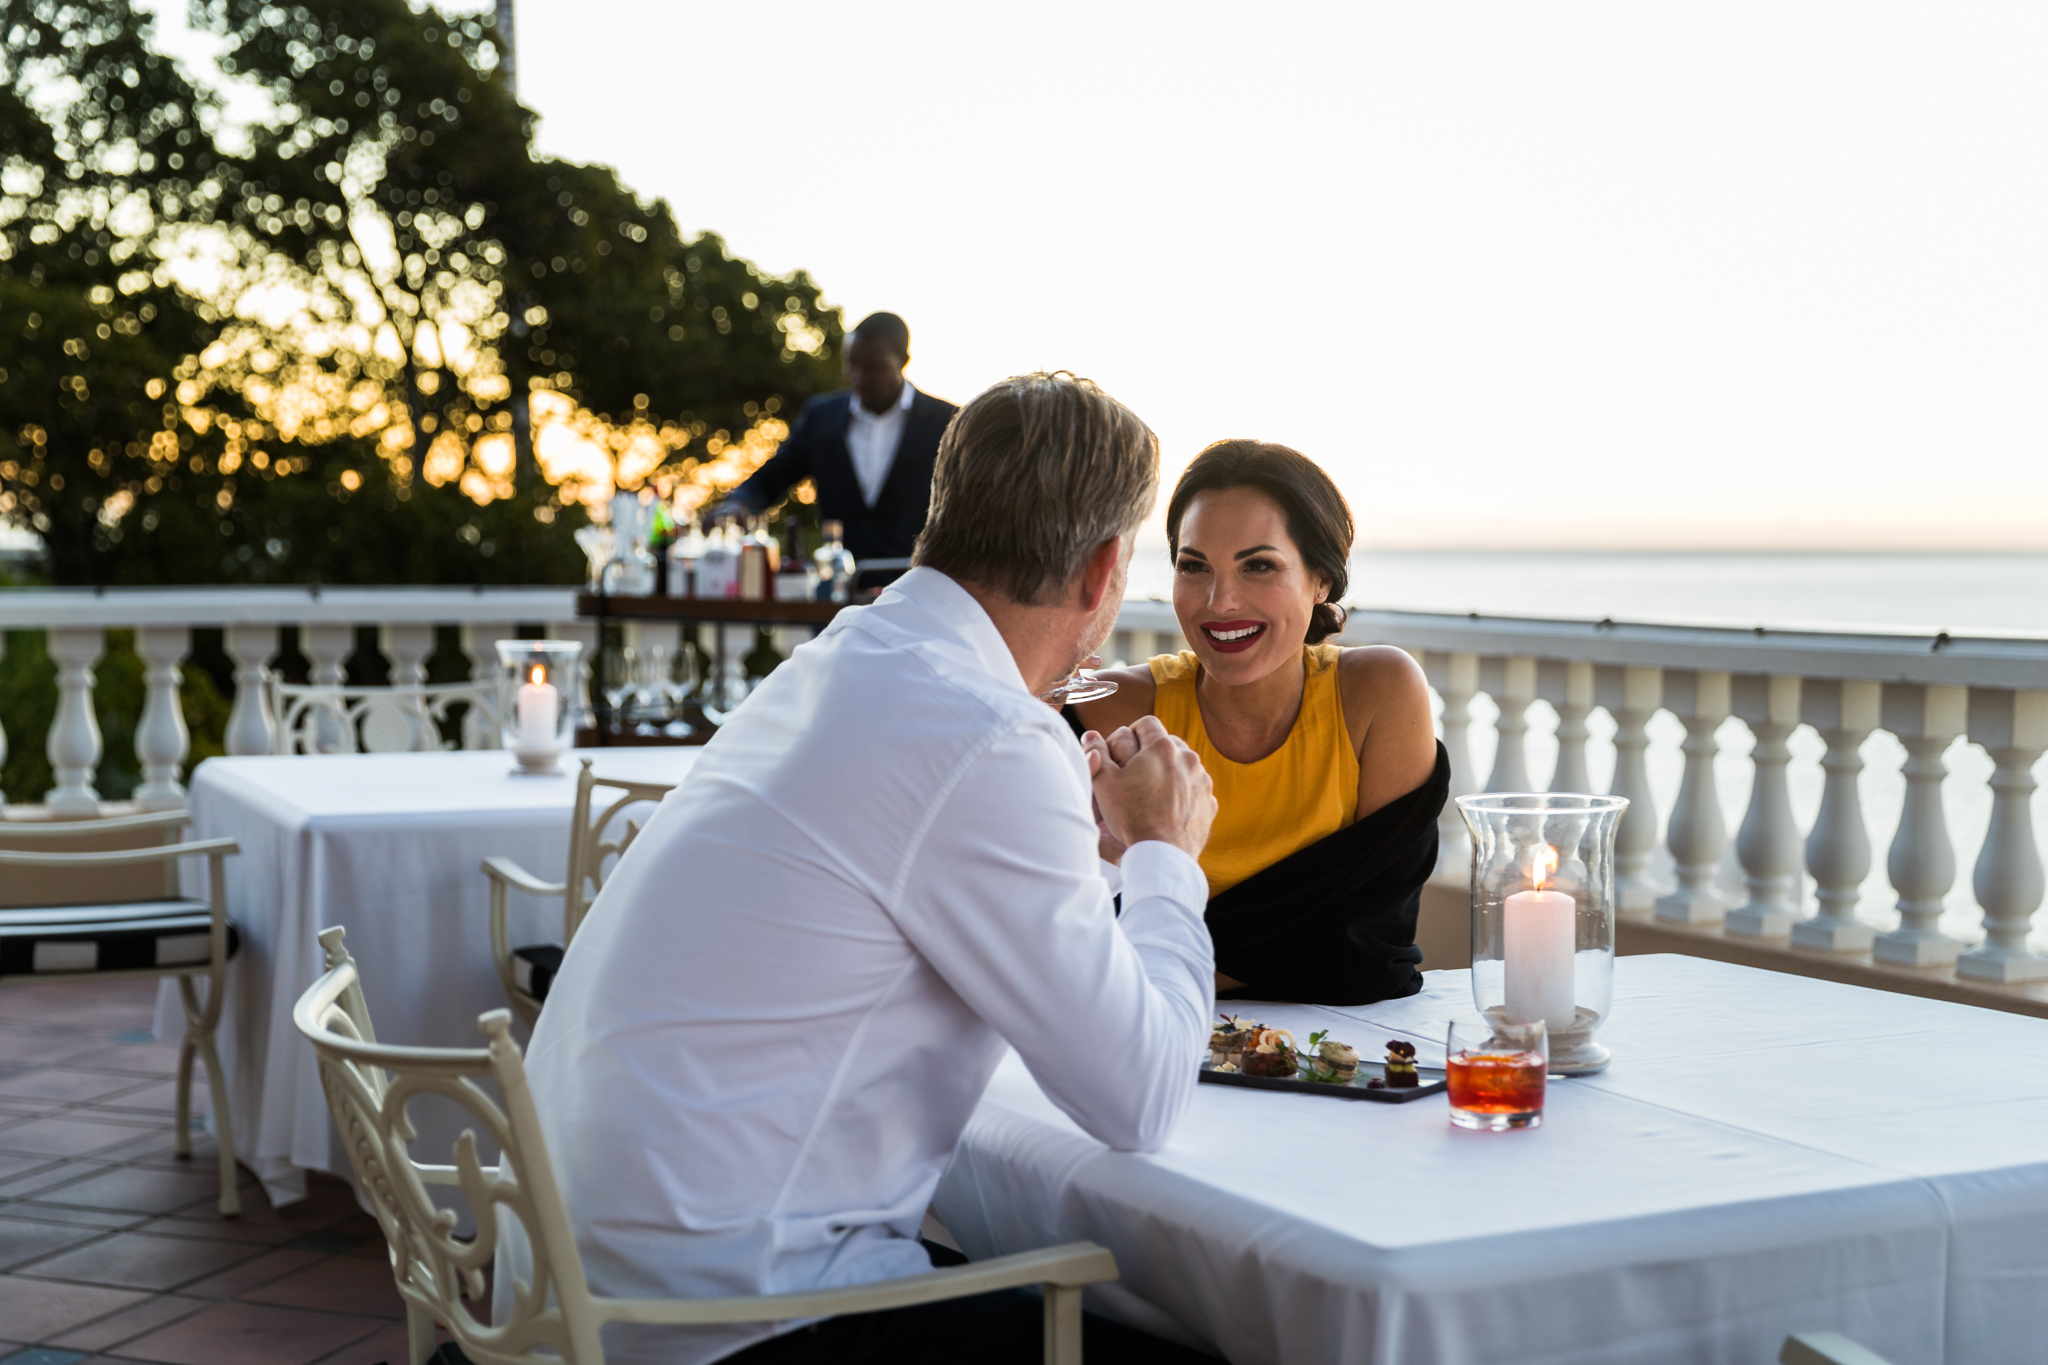 Best places to propose in Africa includes Cape Town